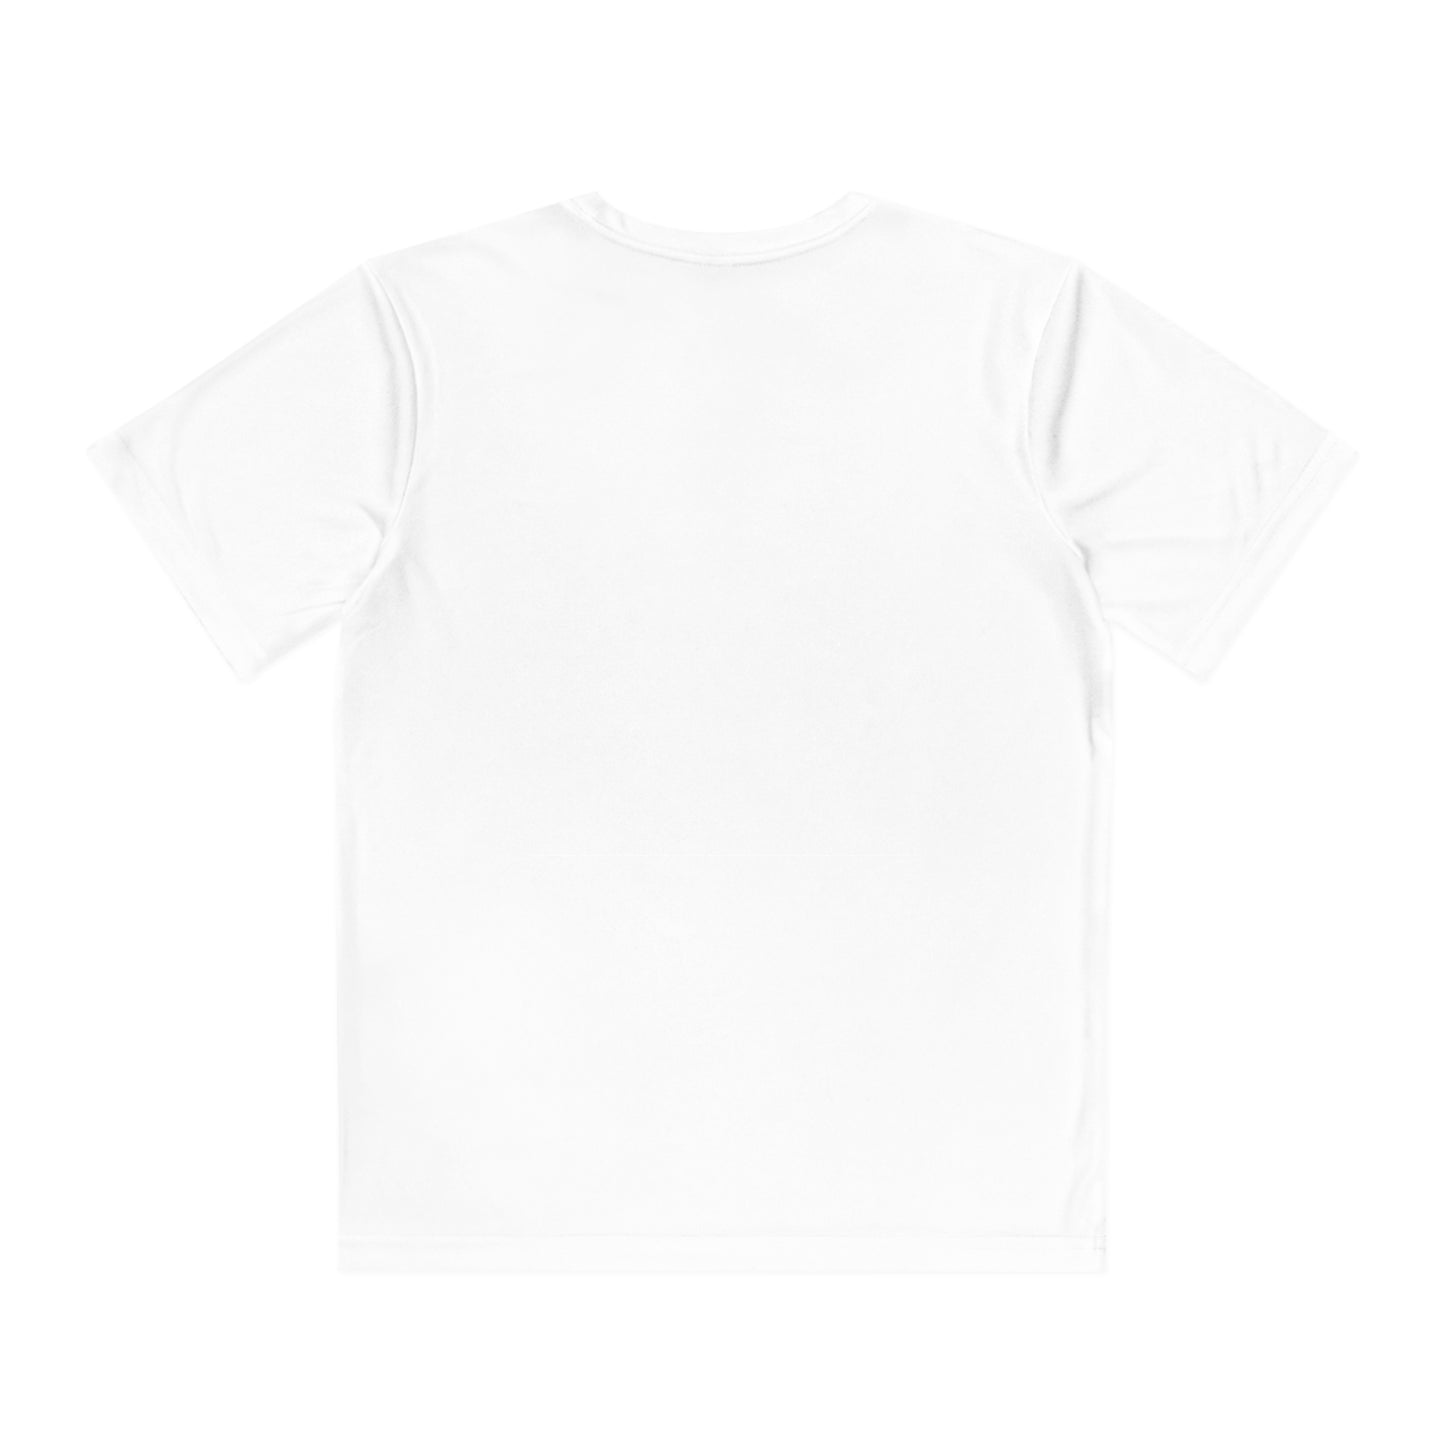 AdTech God Youth Competitor Tee